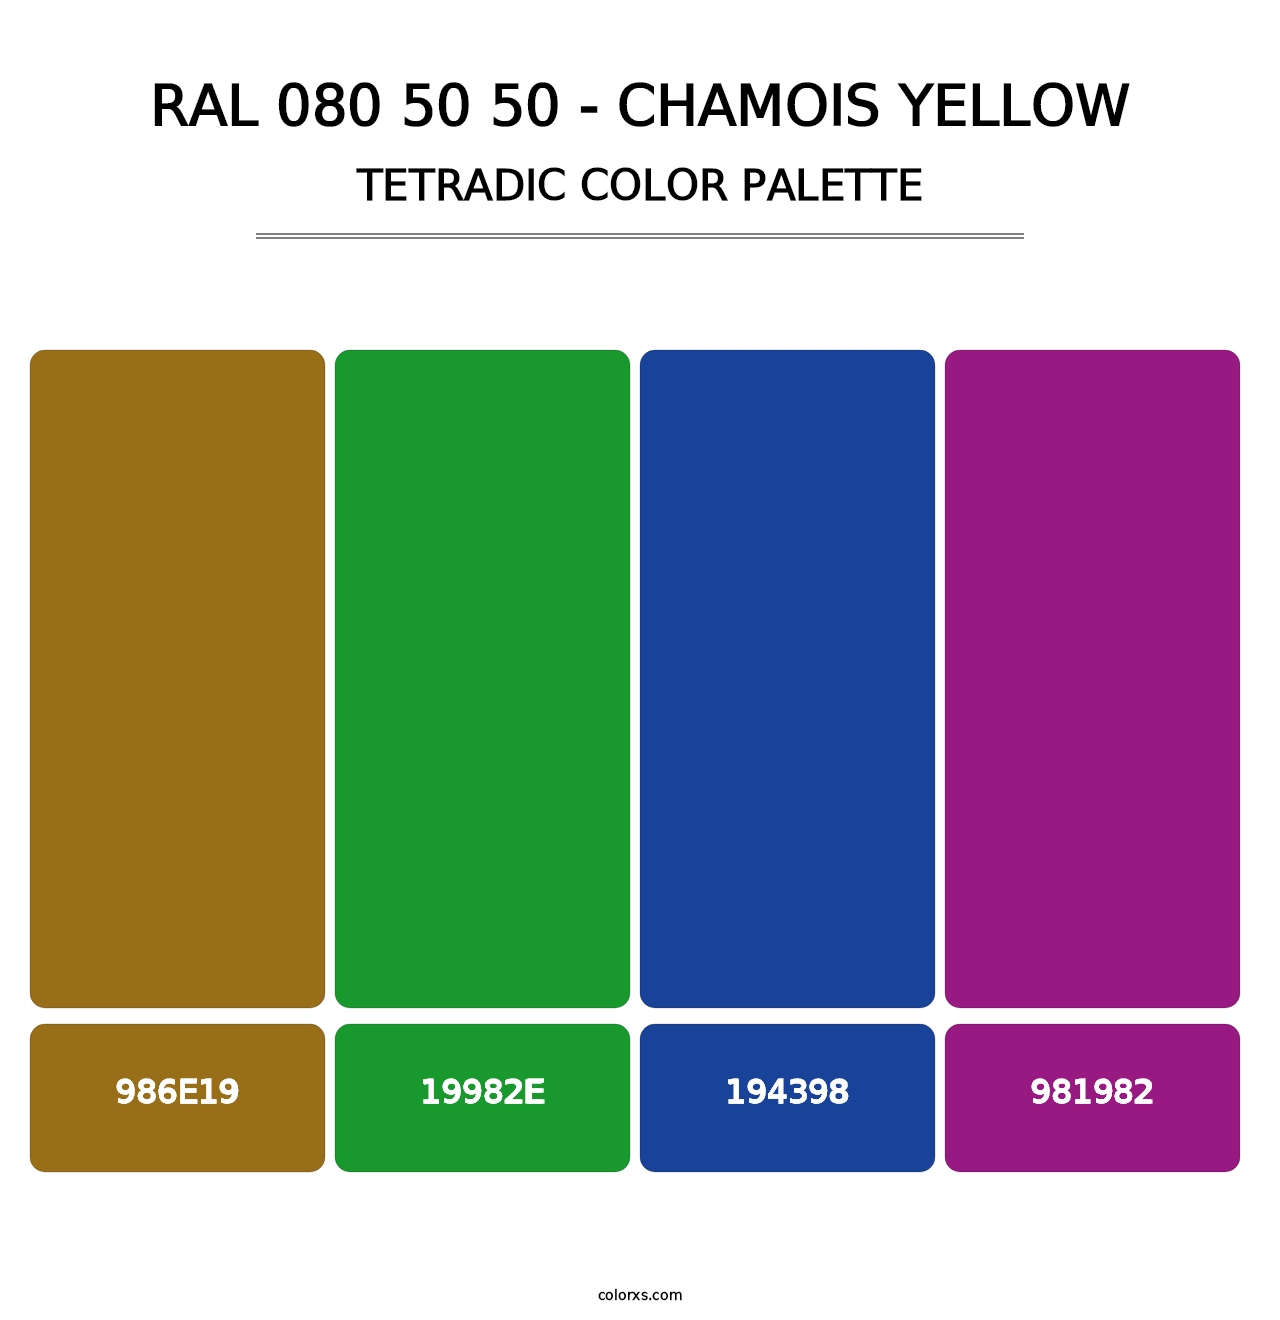 RAL 080 50 50 - Chamois Yellow - Tetradic Color Palette